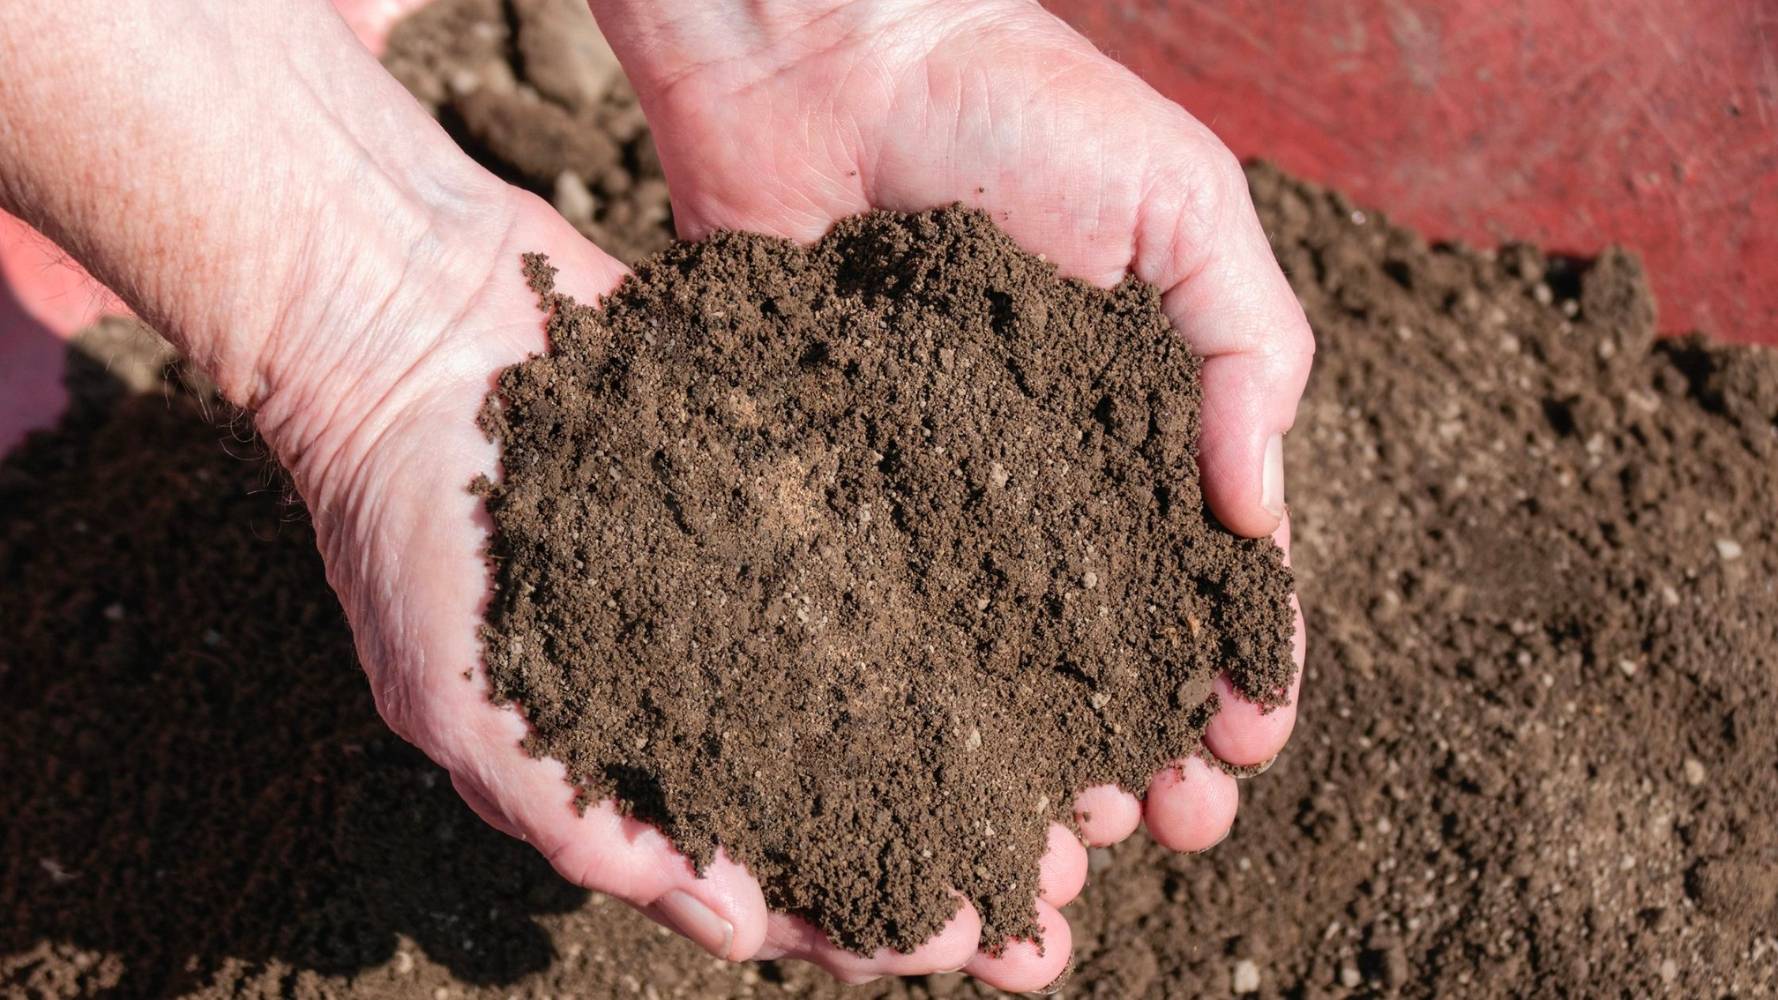 Topsoil in a persons hands